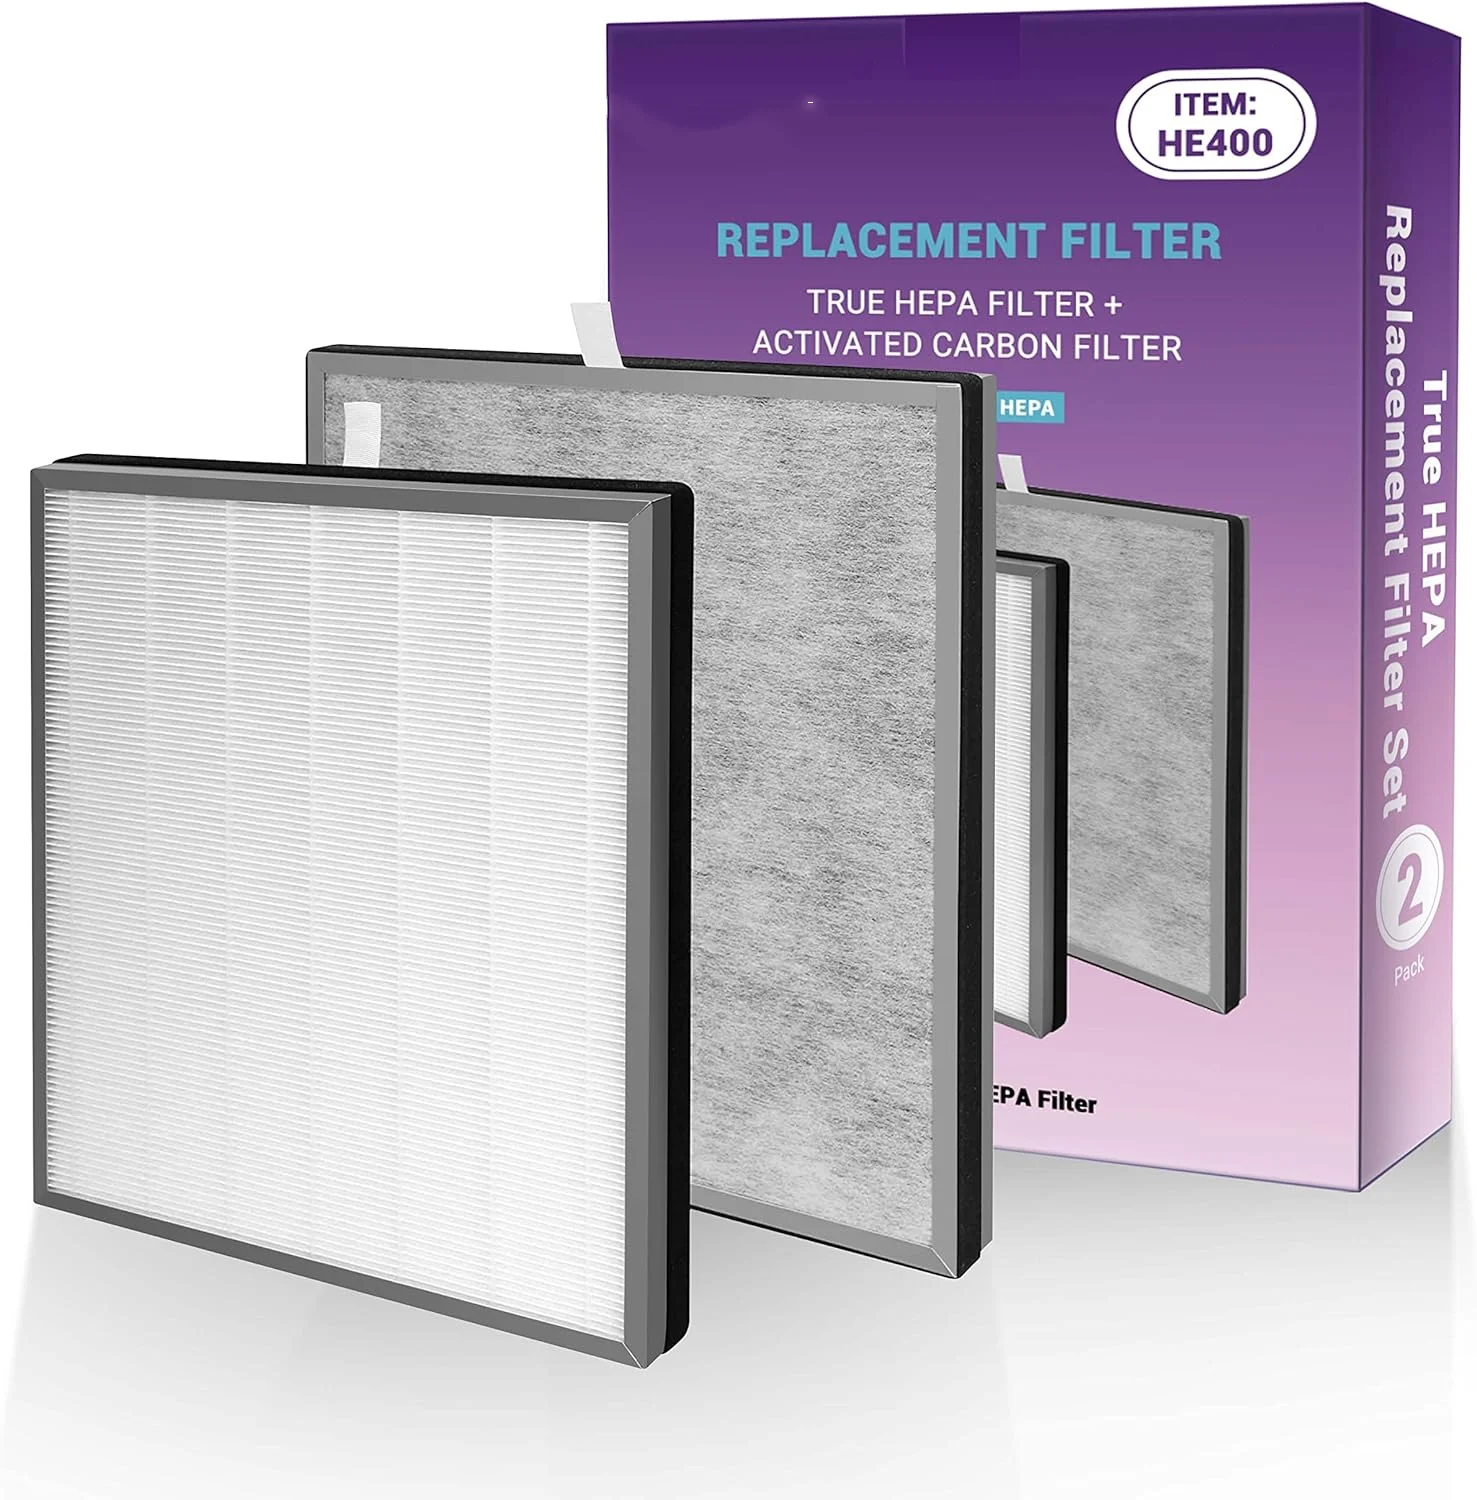 

Pack HE400 Replacement Filter for SHARK air purifier 4 filter,HE401 HE402 HE405 Extra Protection Particle Carbon+True HEPA Pre F